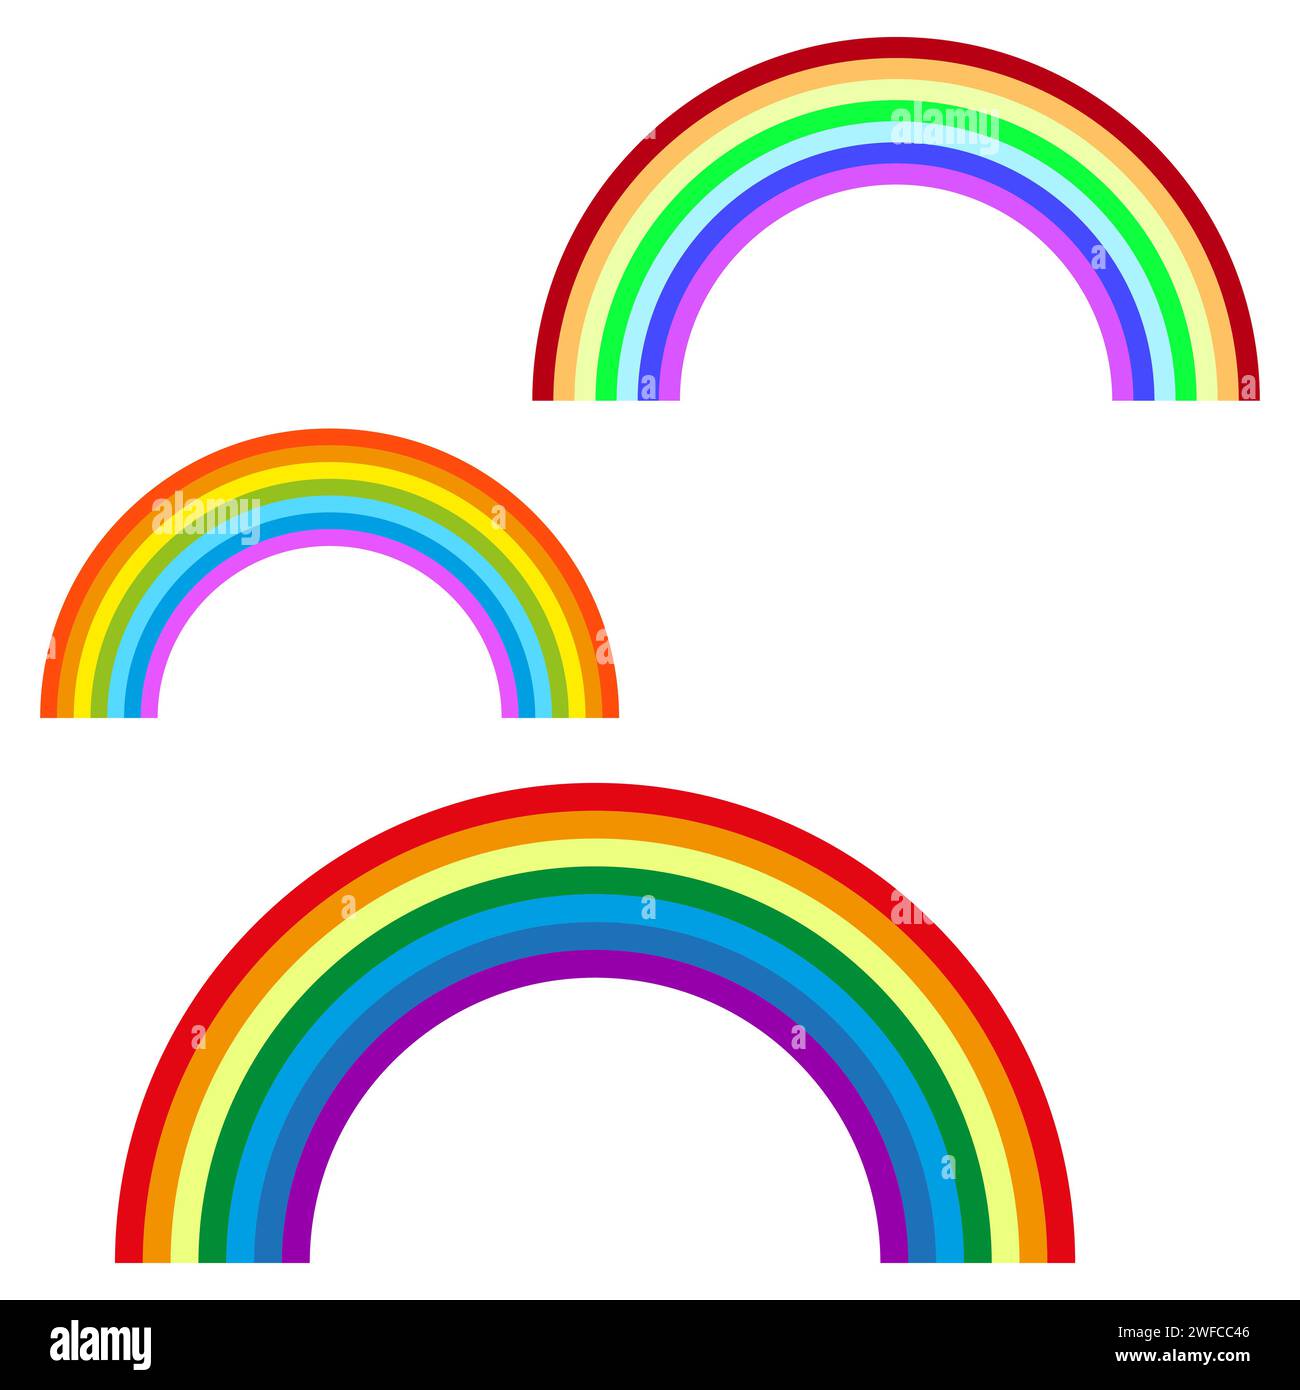 Rainbow arc shape Stock Vector Images - Page 2 - Alamy